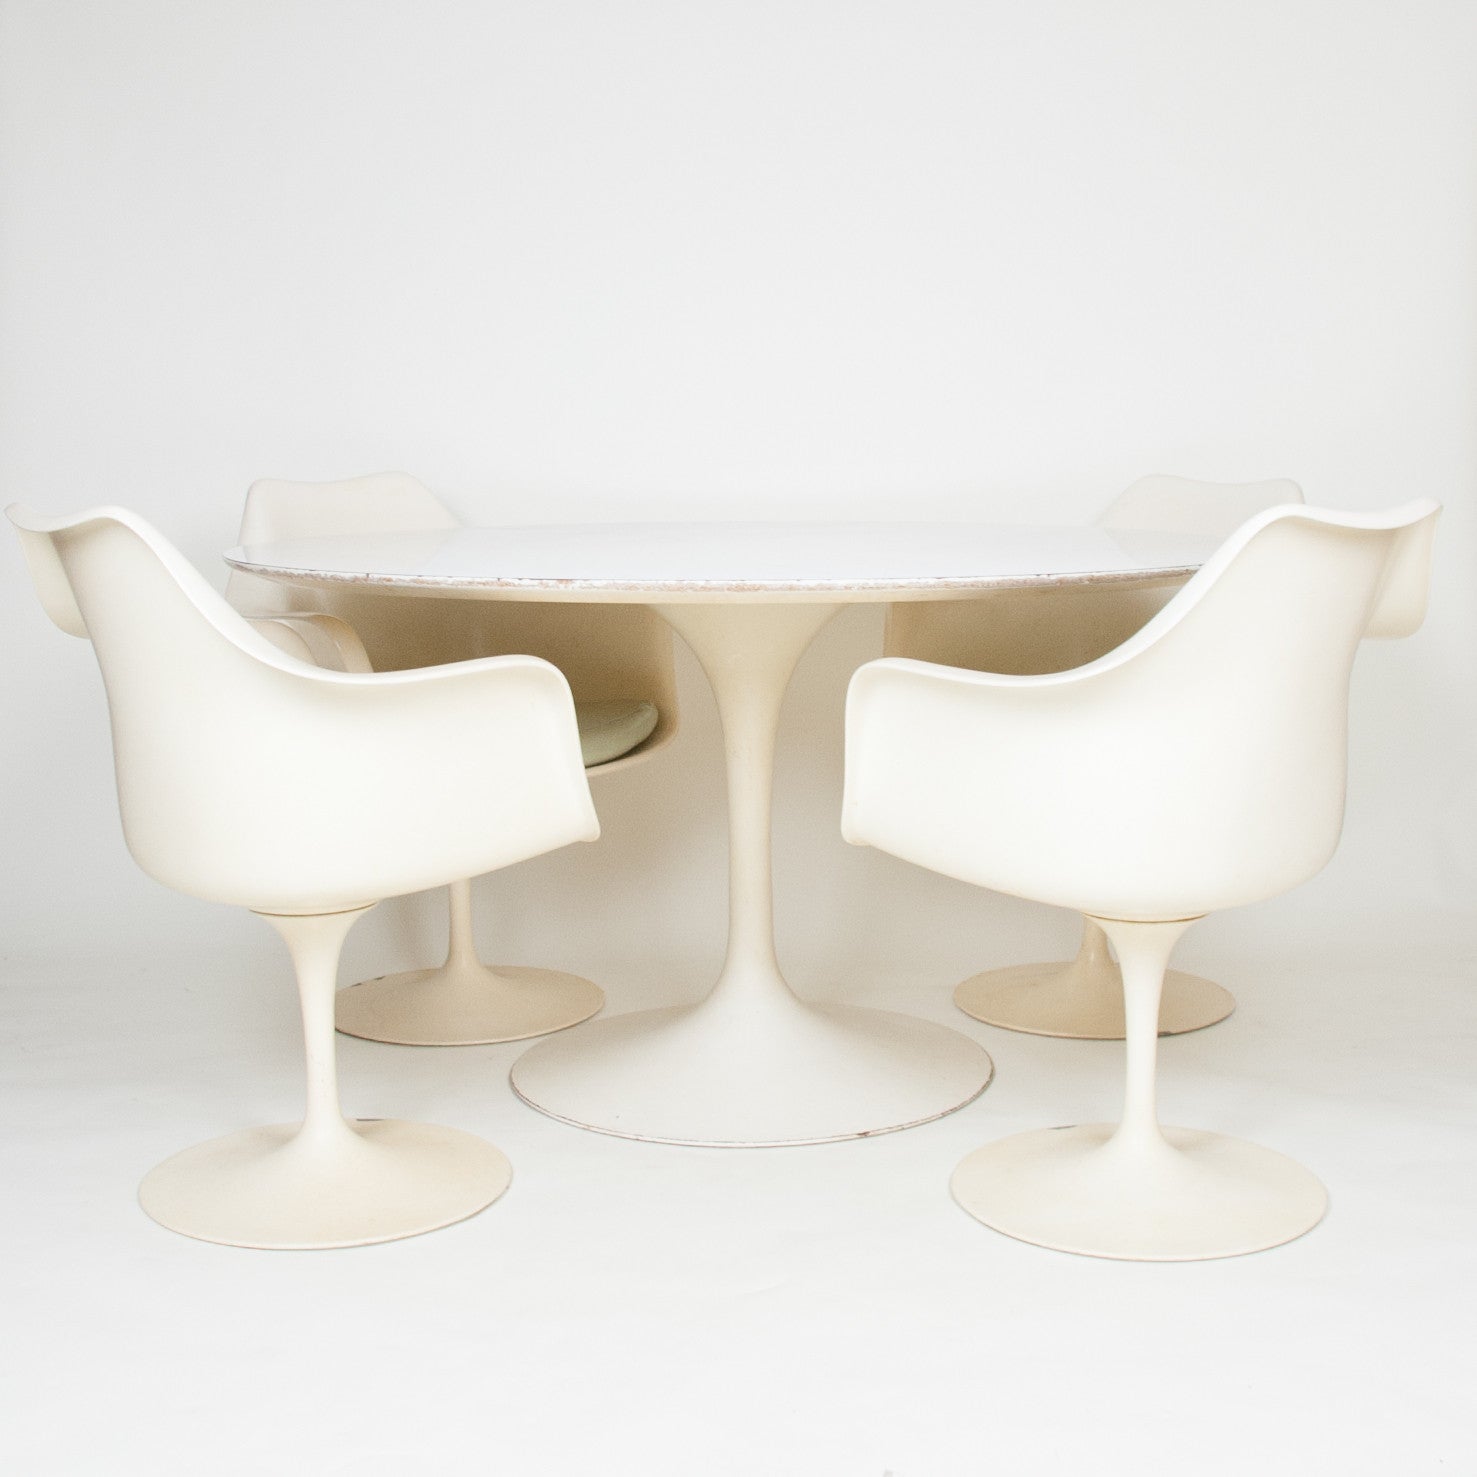 SOLD Eero Saarinen For Knoll 54 Inch Tulip Conference / Dining Table with 4 Tulip Arm Chairs 1960's Vintage